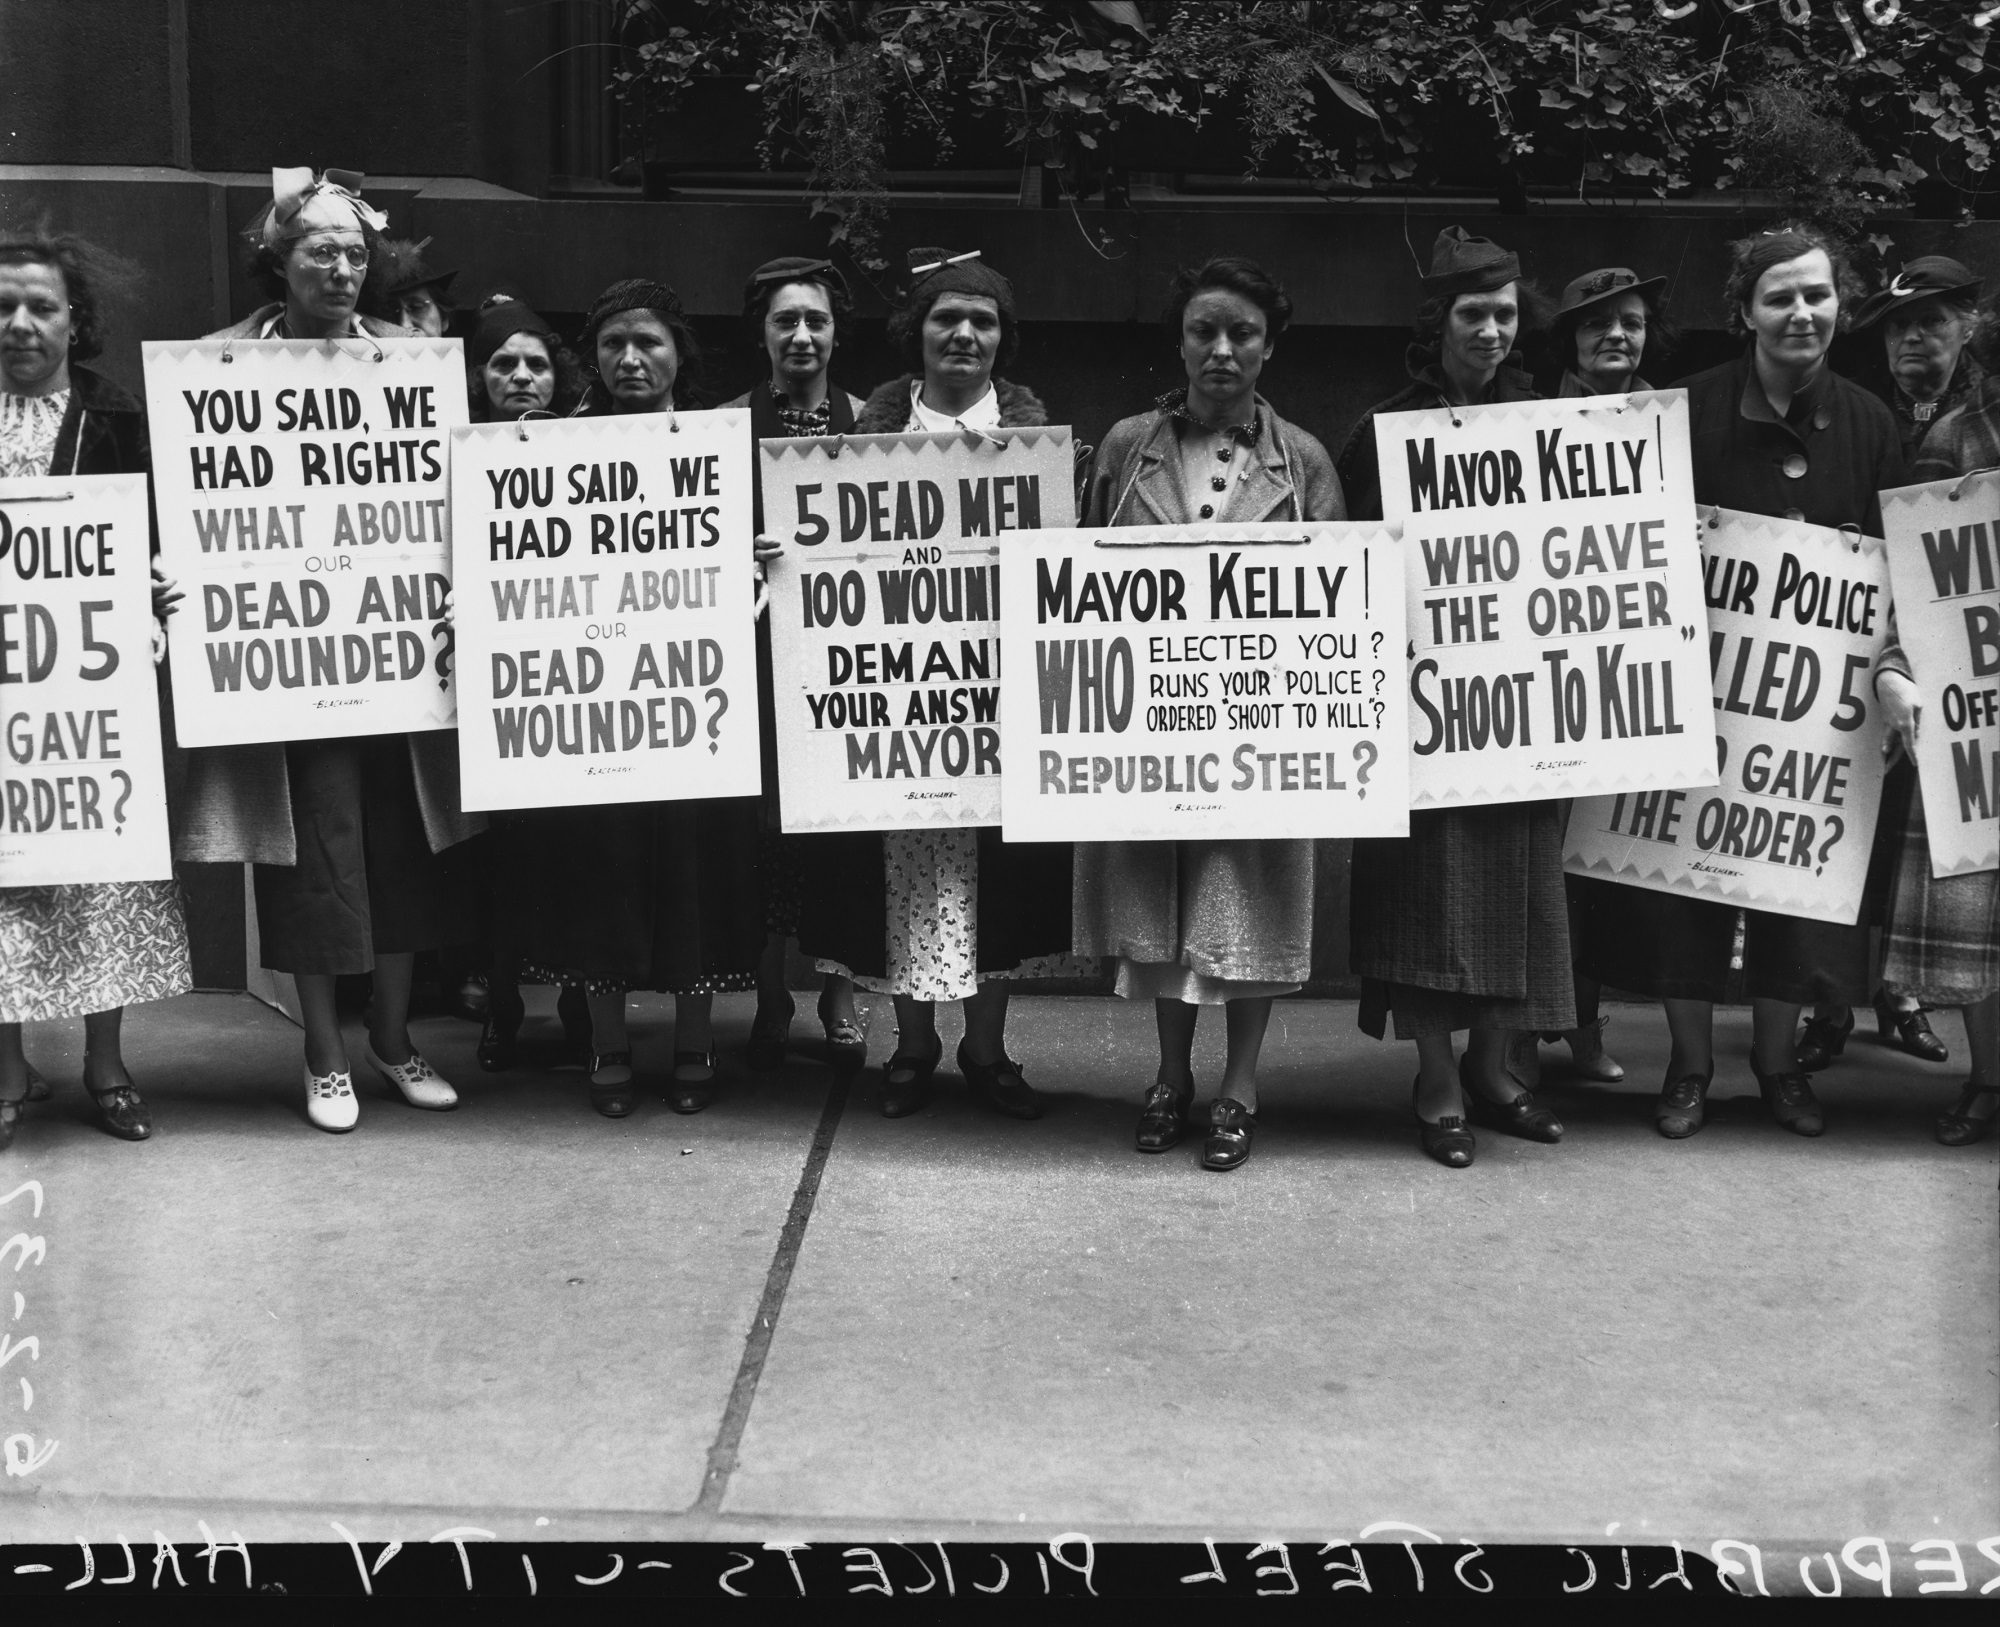 Women protesters picketing at City Hall in support of Republic Steel strikers after what is known as the Memorial Day massacre, Chicago, Illinois, June 2, 1937.